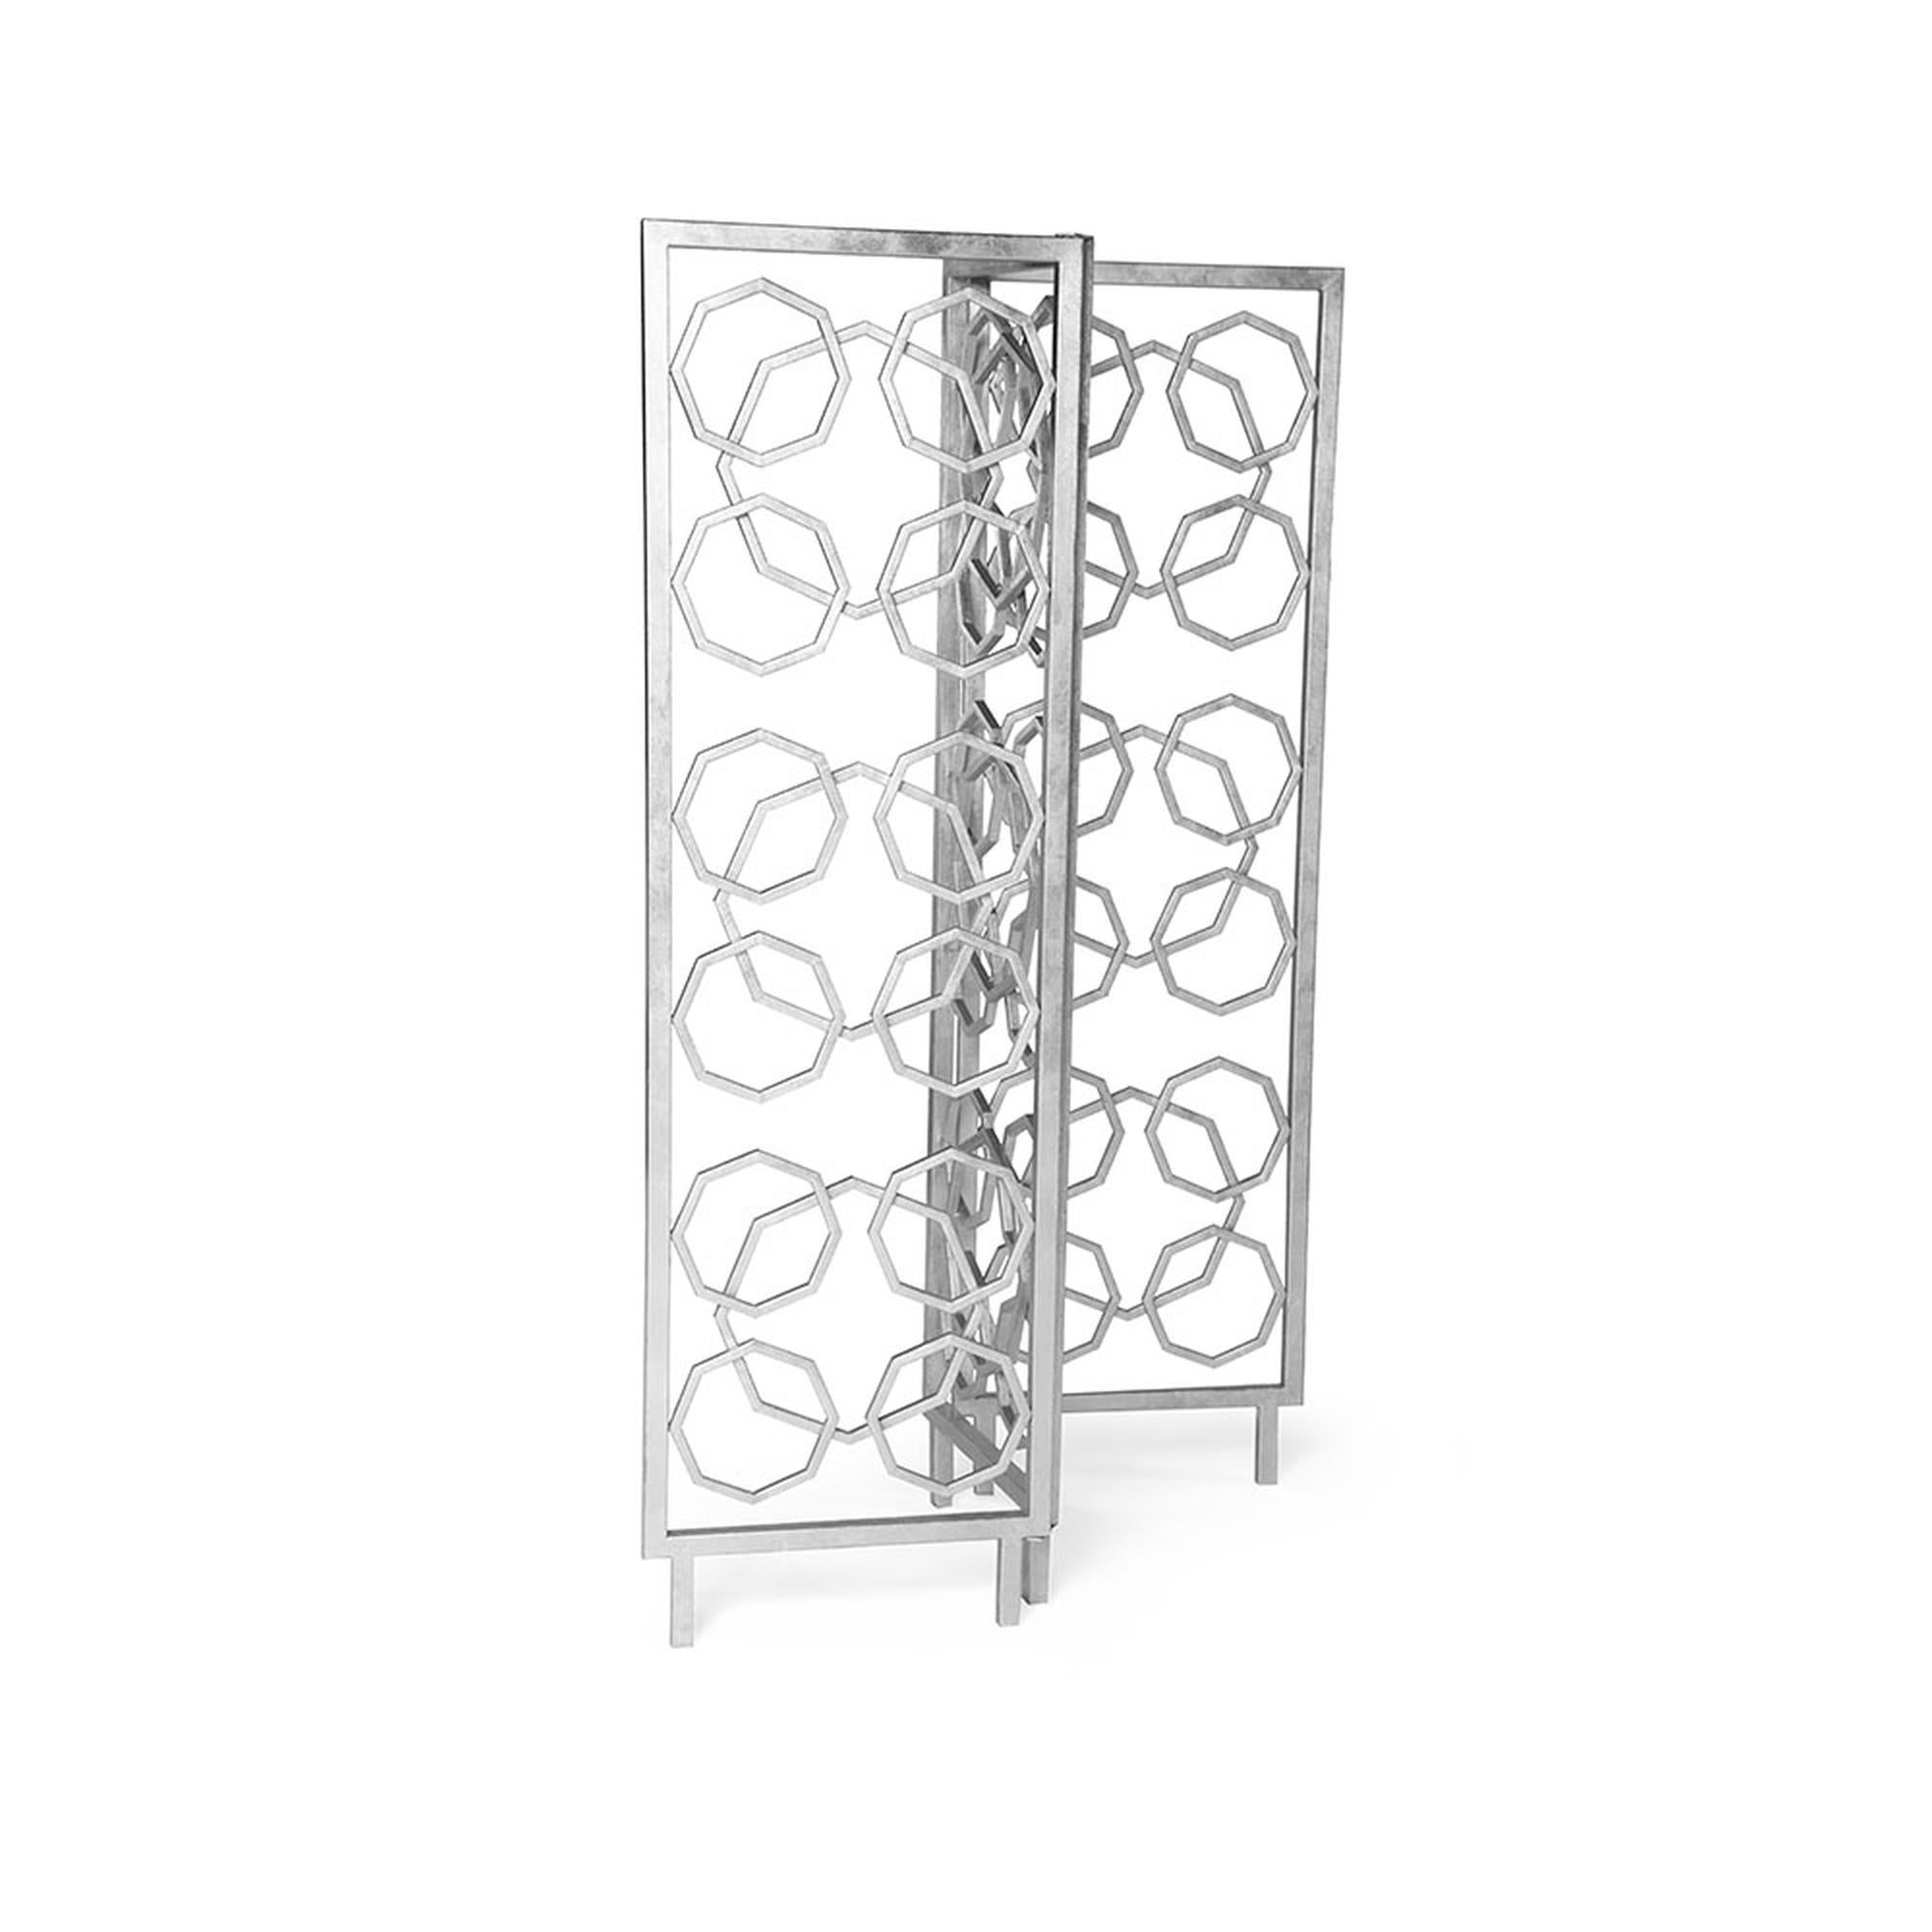 The sophisticated, hand-gilded Casablanca room screen is perfect to elegantly divide an area while adding design to a space. This one-of-a-kind room divider showcases dimensional design and originality with its octagonal metal structures. Discreet